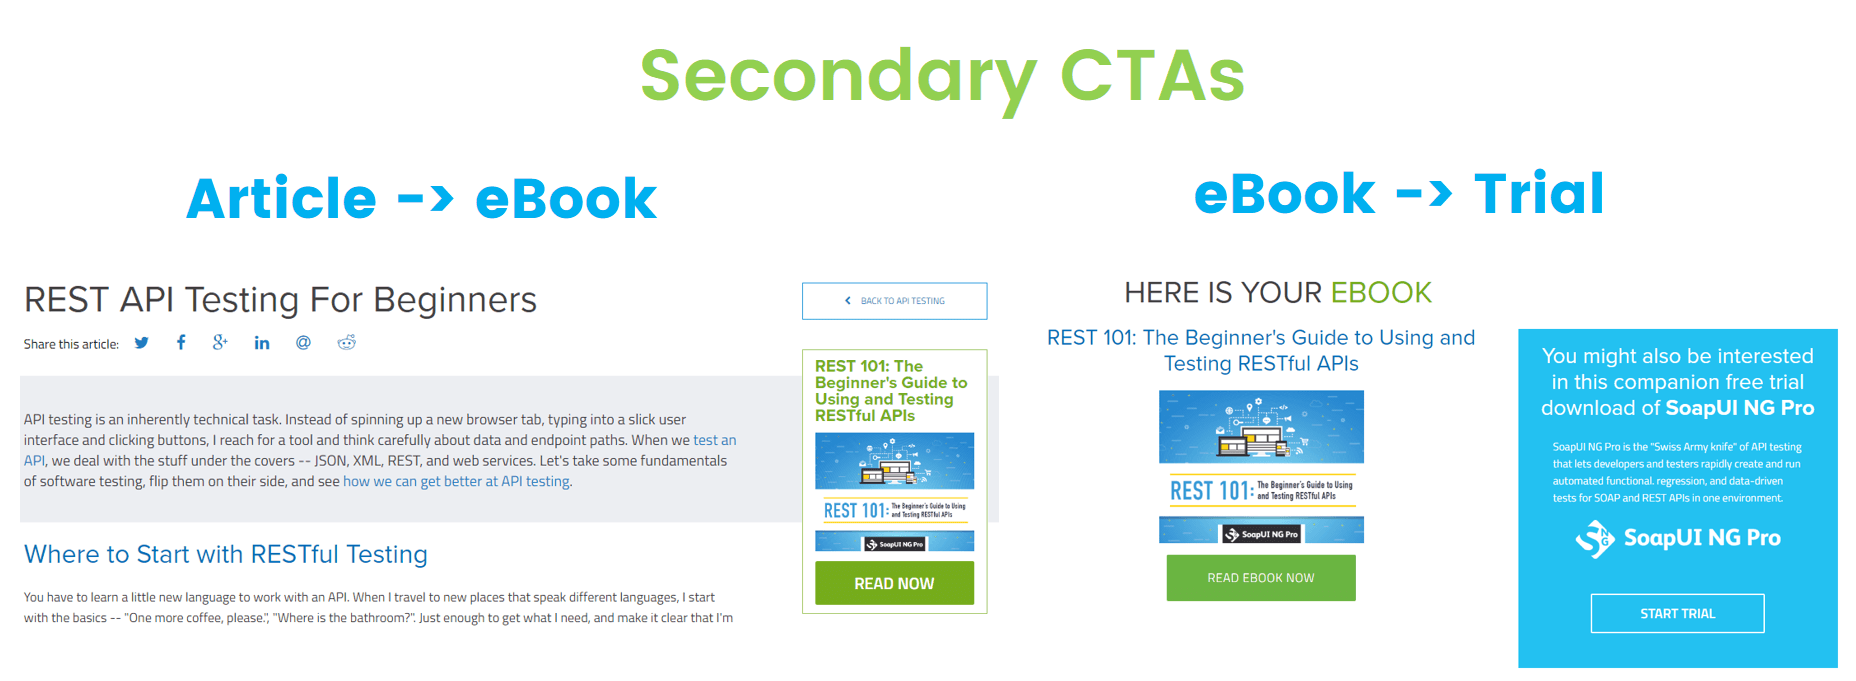 Secondary Call to Action Examples